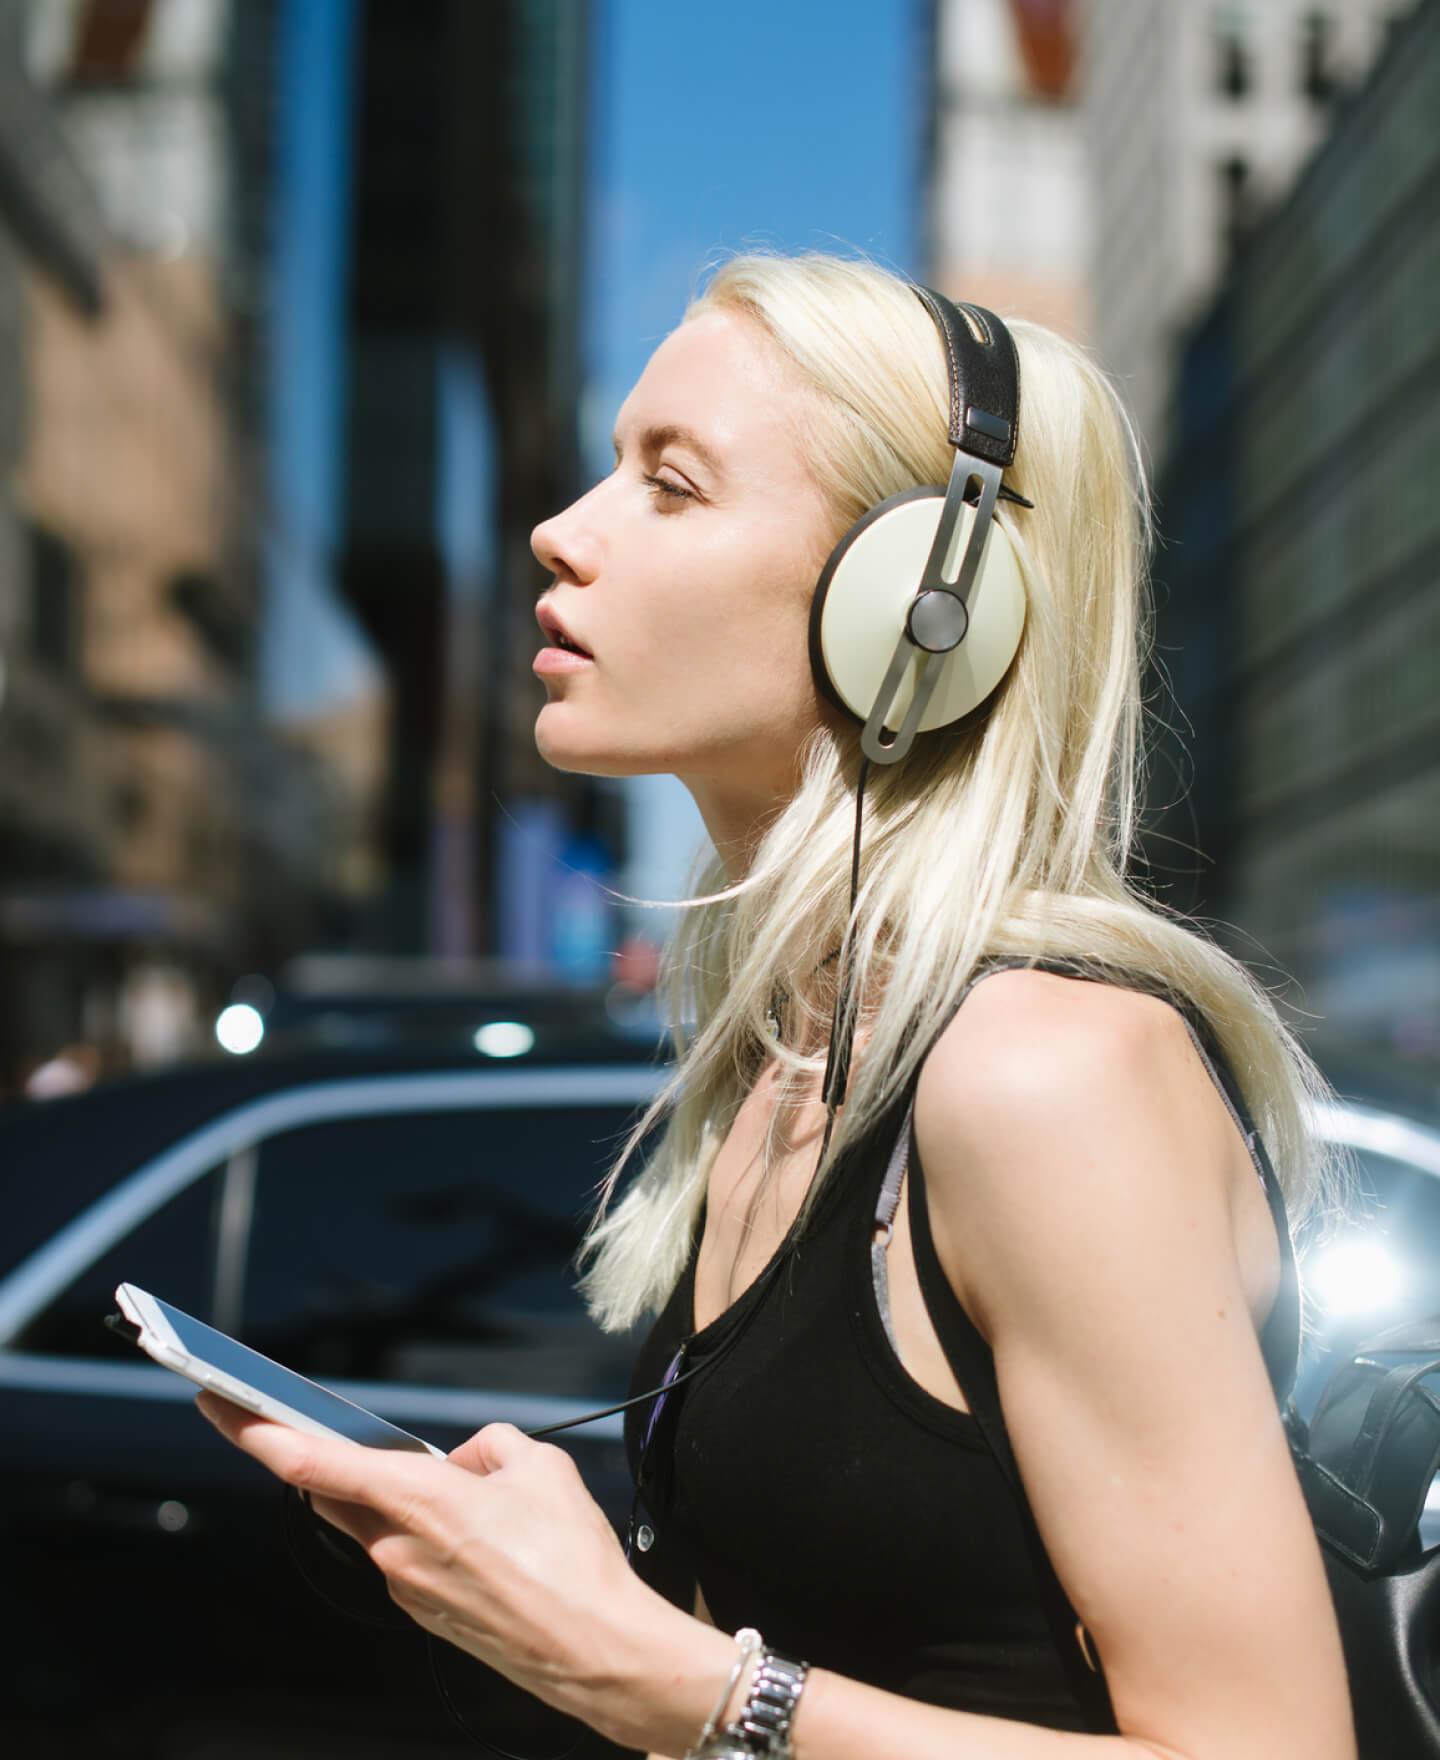 Girl with phone in hand and headphone on head